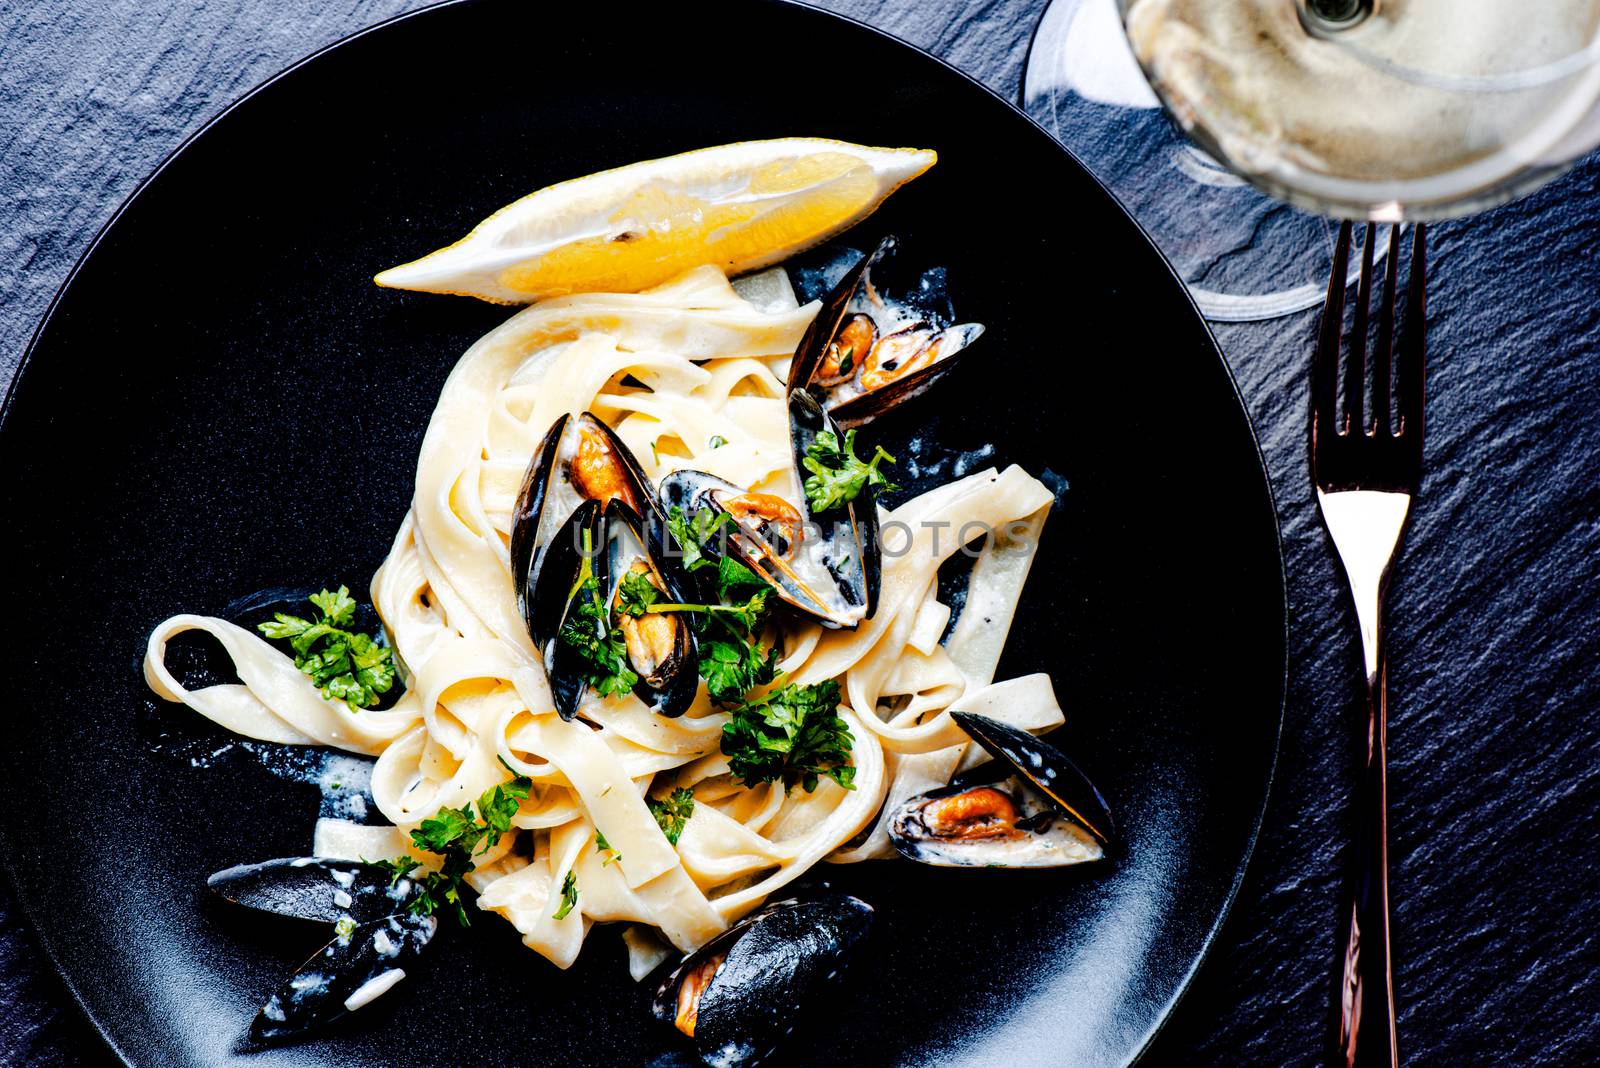 Blue mussels and pasta in black plate on stone surface